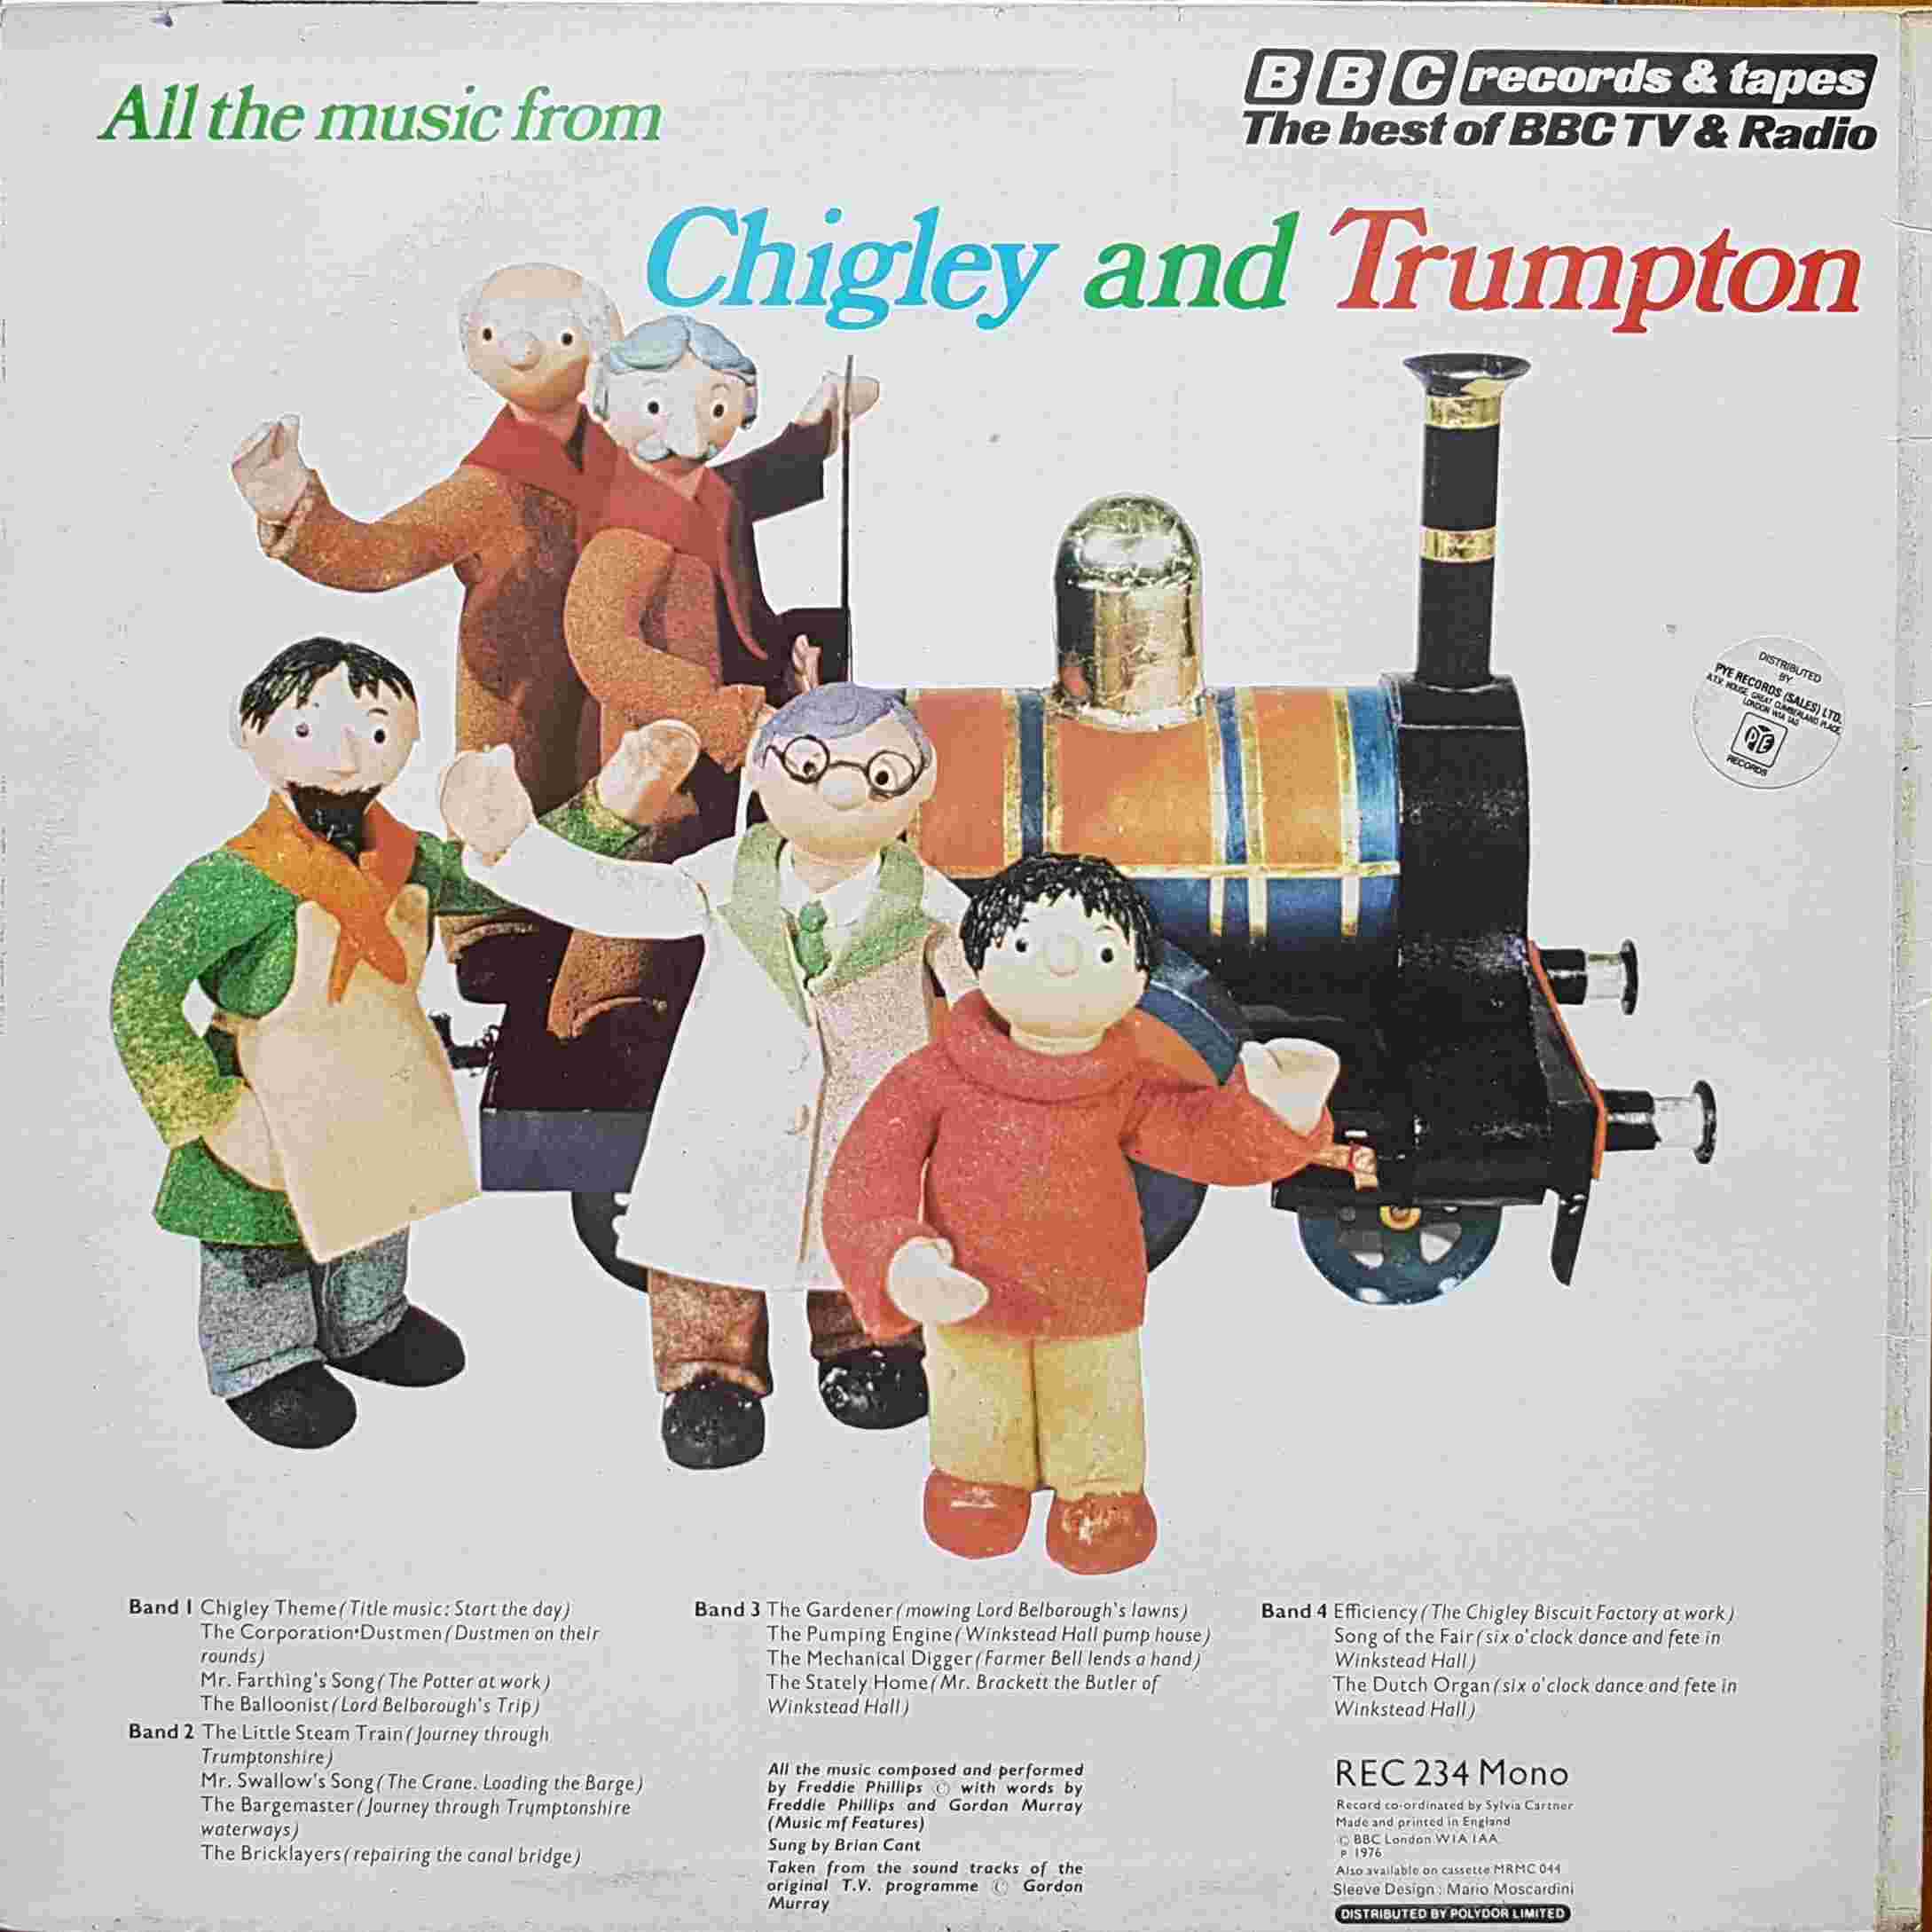 Picture of REC 234 All the music from Trumpton and Chigley by artist Freddie Phillips / Gordon Murray from the BBC records and Tapes library